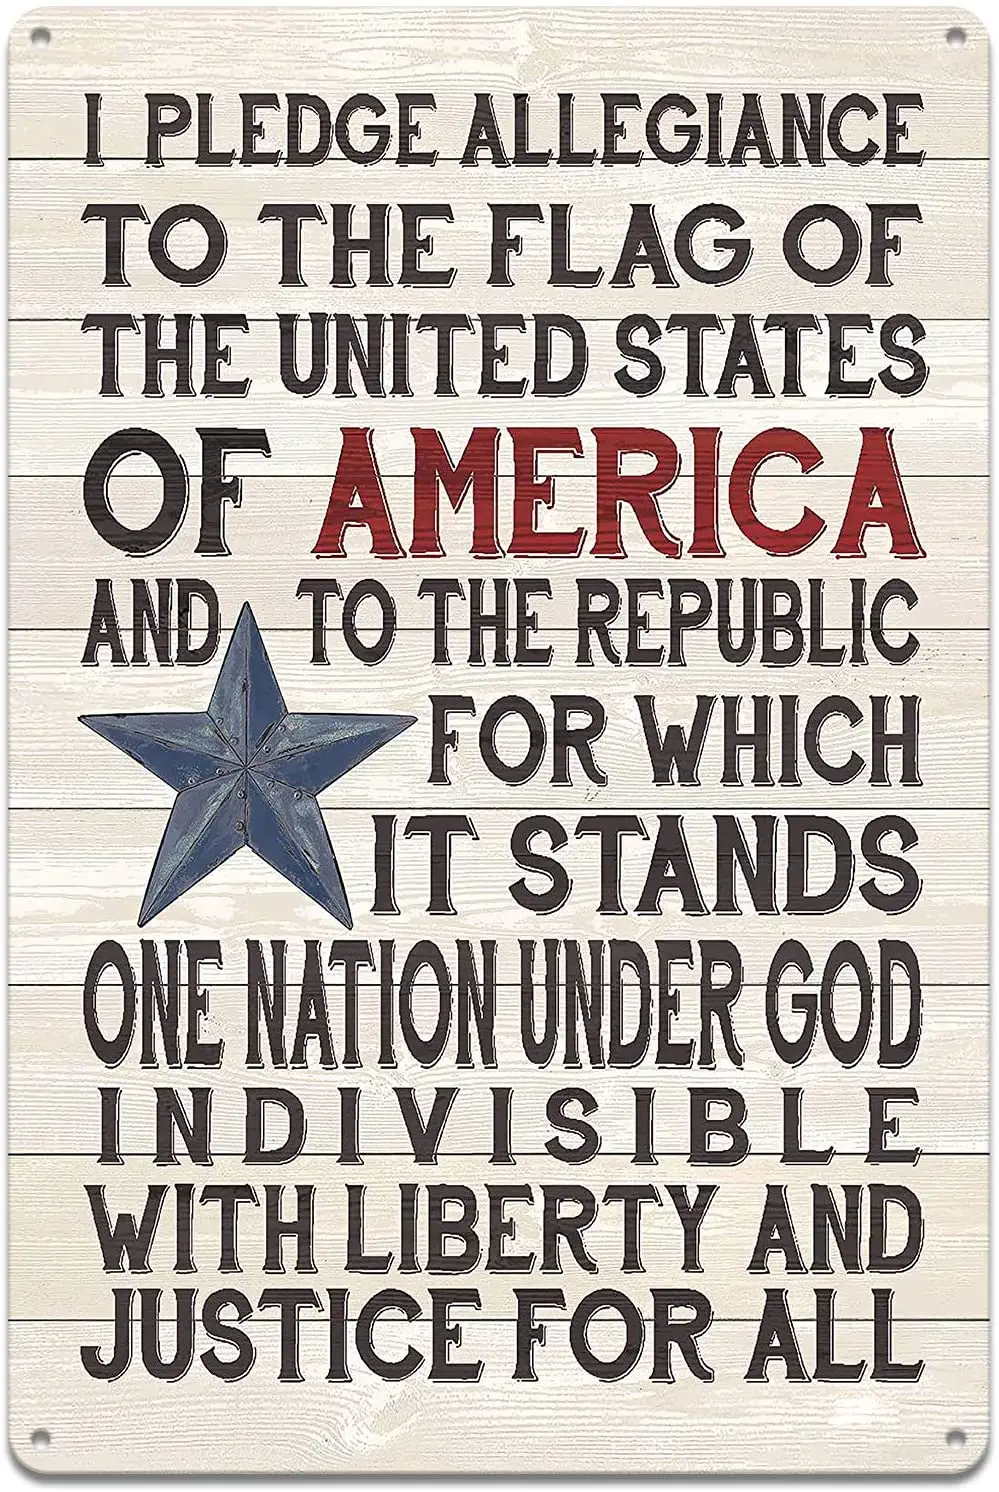 Metal Sign, I Pledge Allegiance Patriotic Poster Rustic Wood Sign, Posters for The Wall, Wall Art, 12x8 inch wood sign wall house modern home decoration wall art wooden block mdf sign tabletop home art letters 2020 new good heart